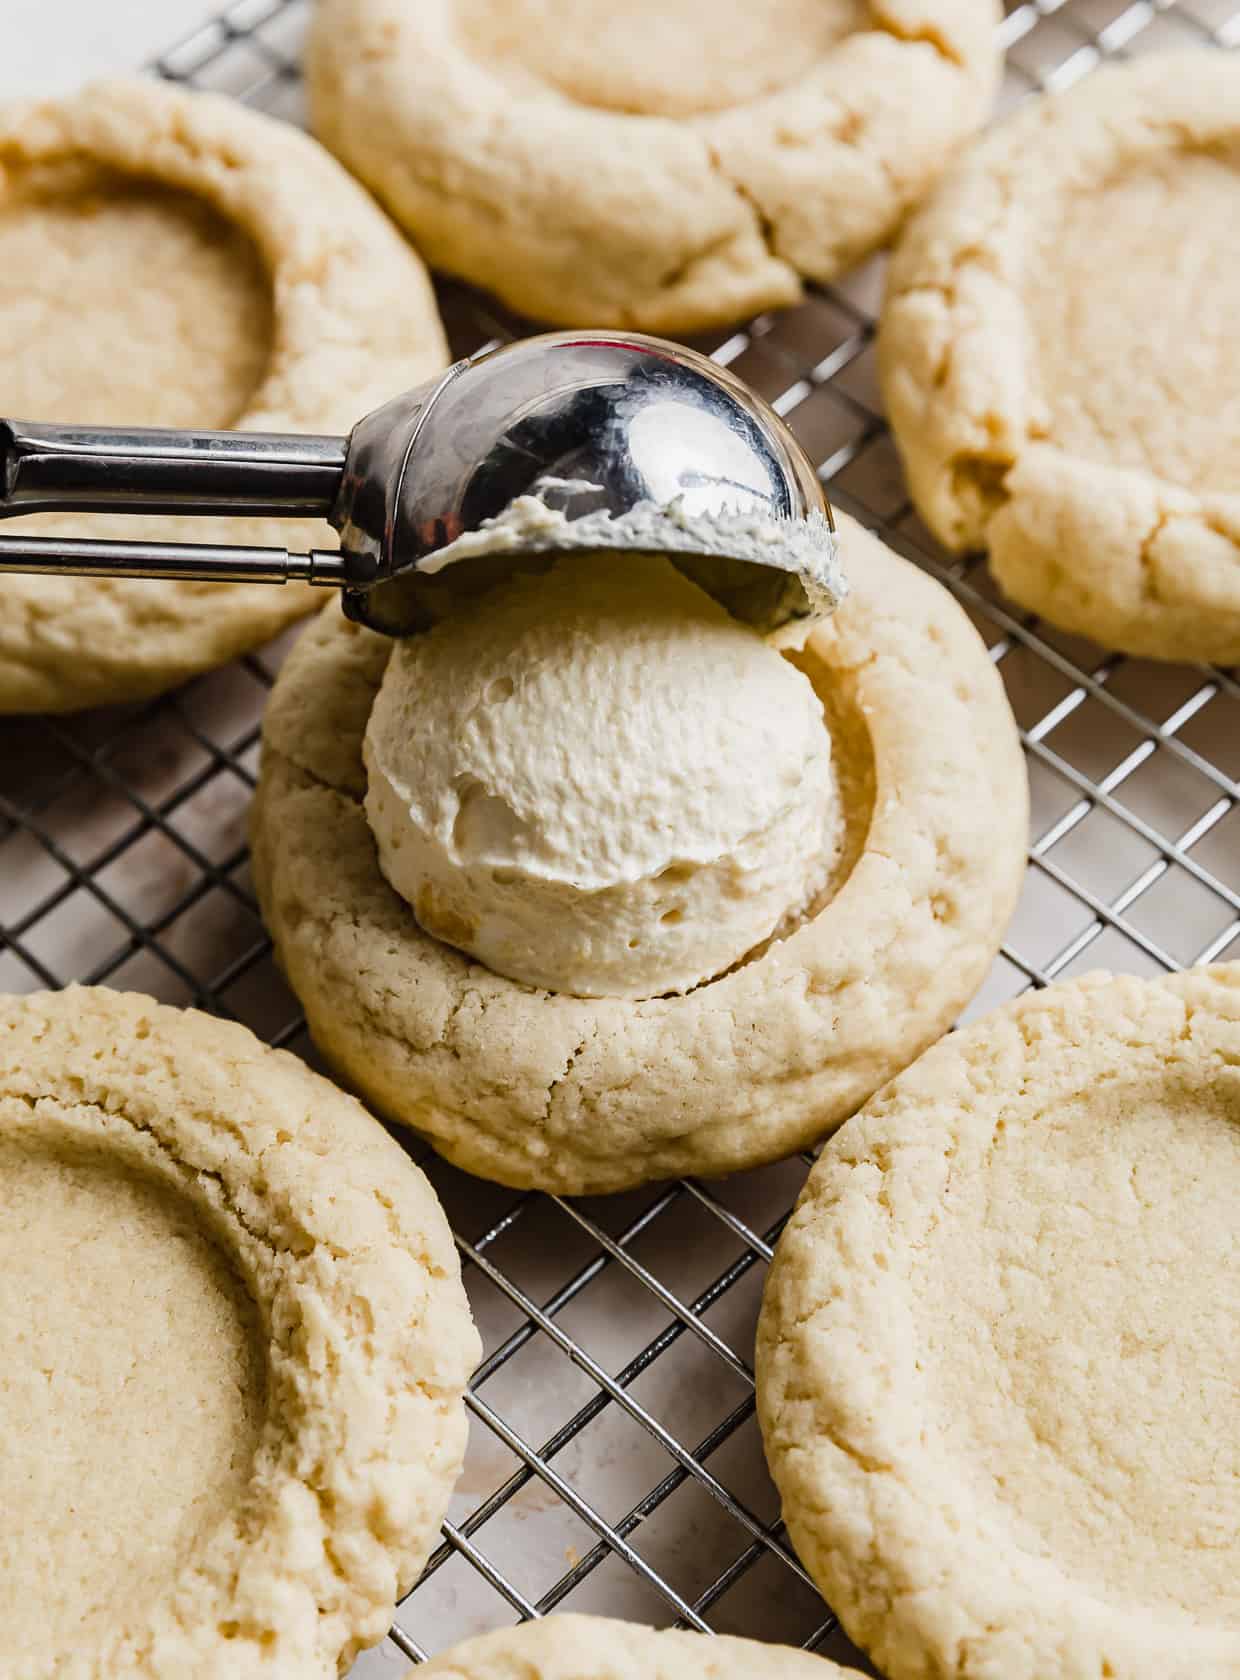 A cookie scoop portioning a light yellow colored cream on top of a sugar cookie.